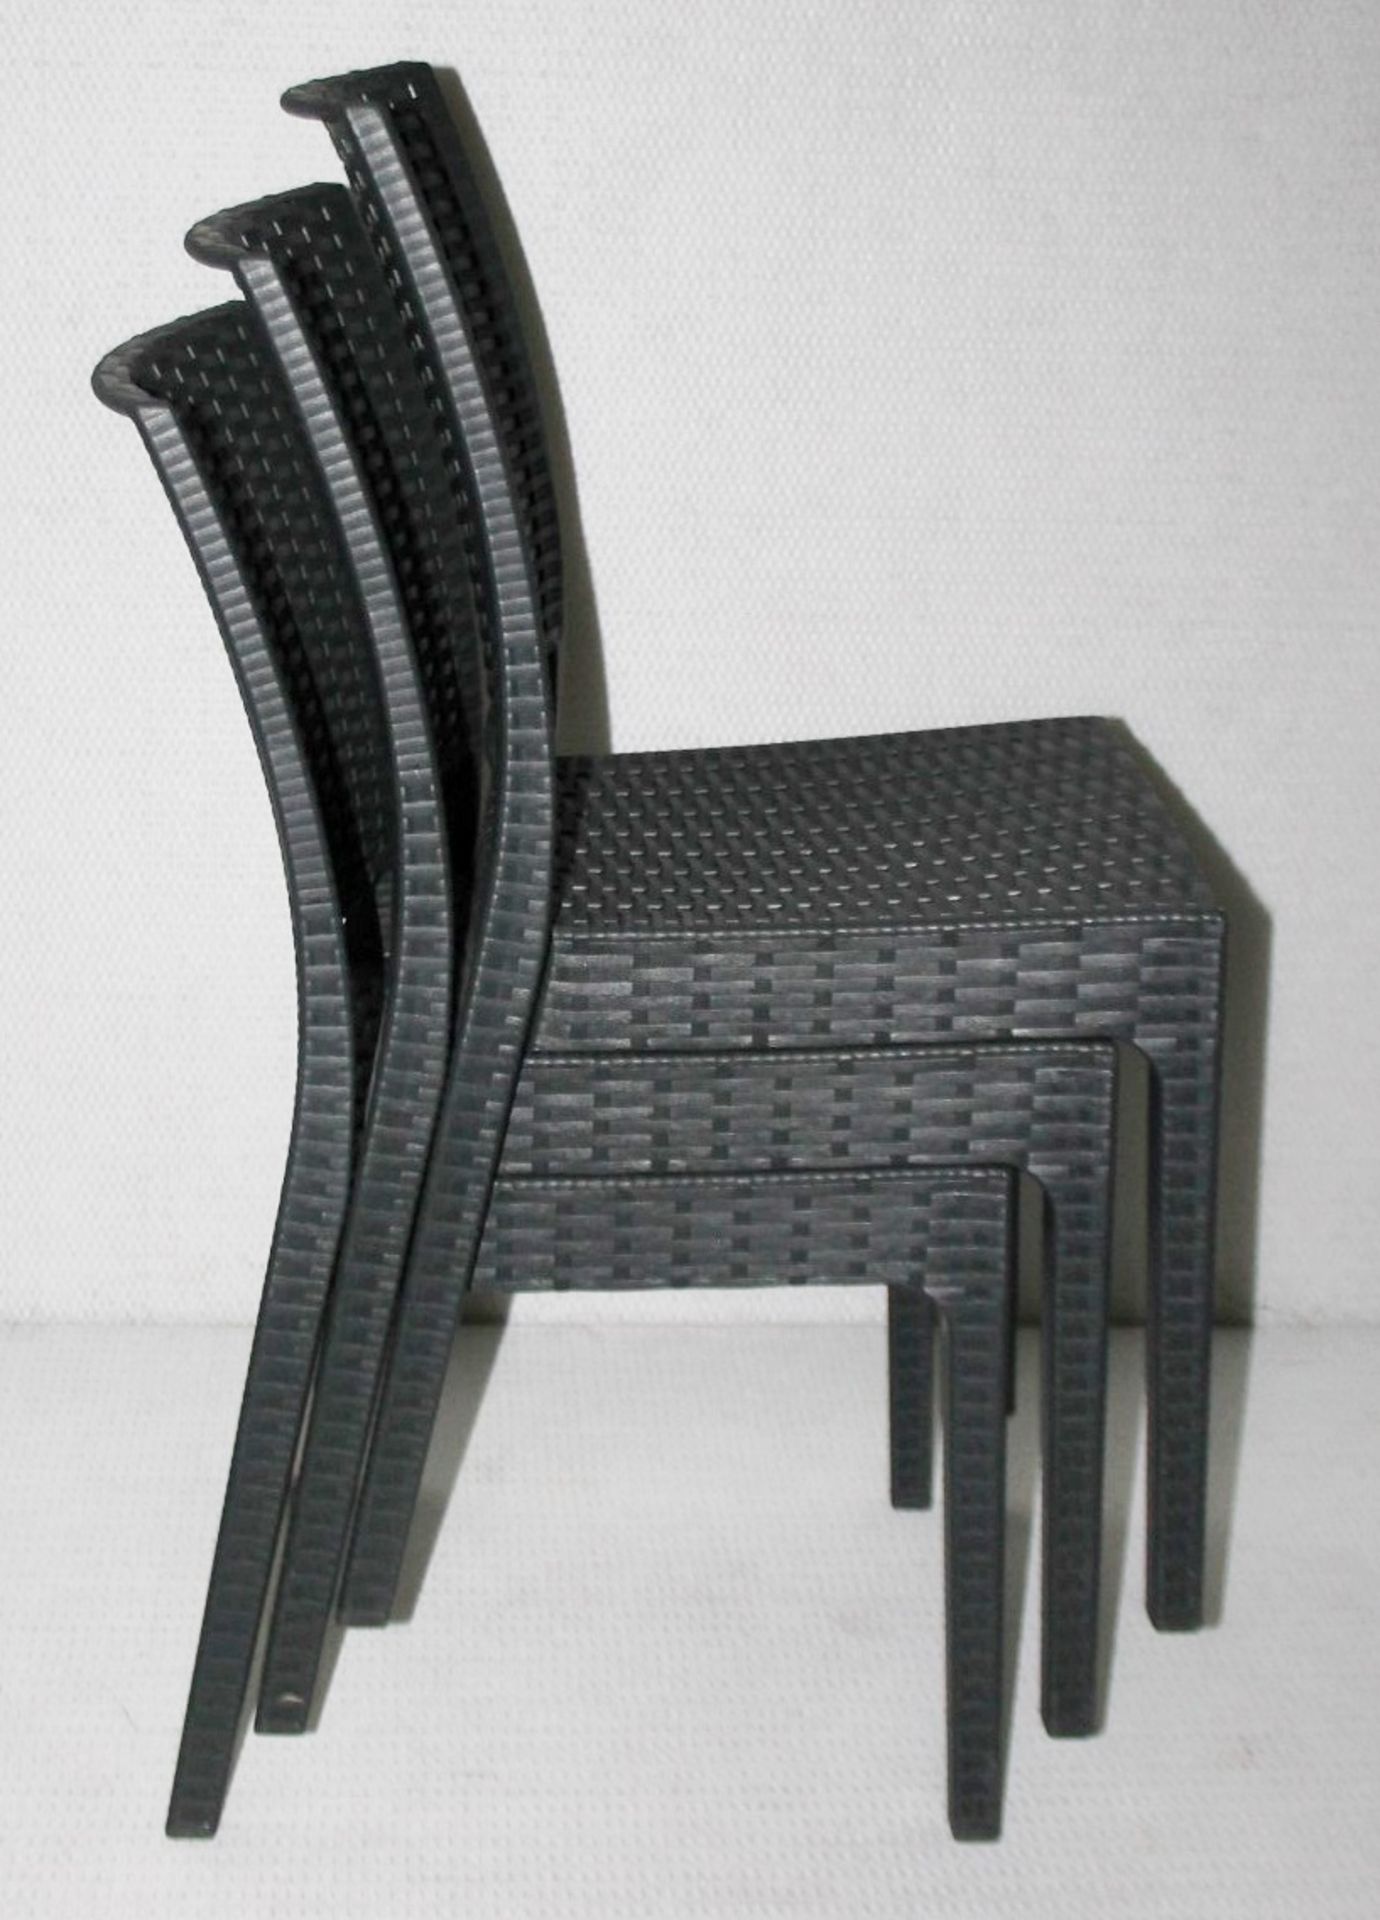 4 x SIESTA EXCLUSIVE 'Florida' Commercial Stackable Rattan-style Chairs In Dark Grey - CL987 - Total - Image 8 of 13